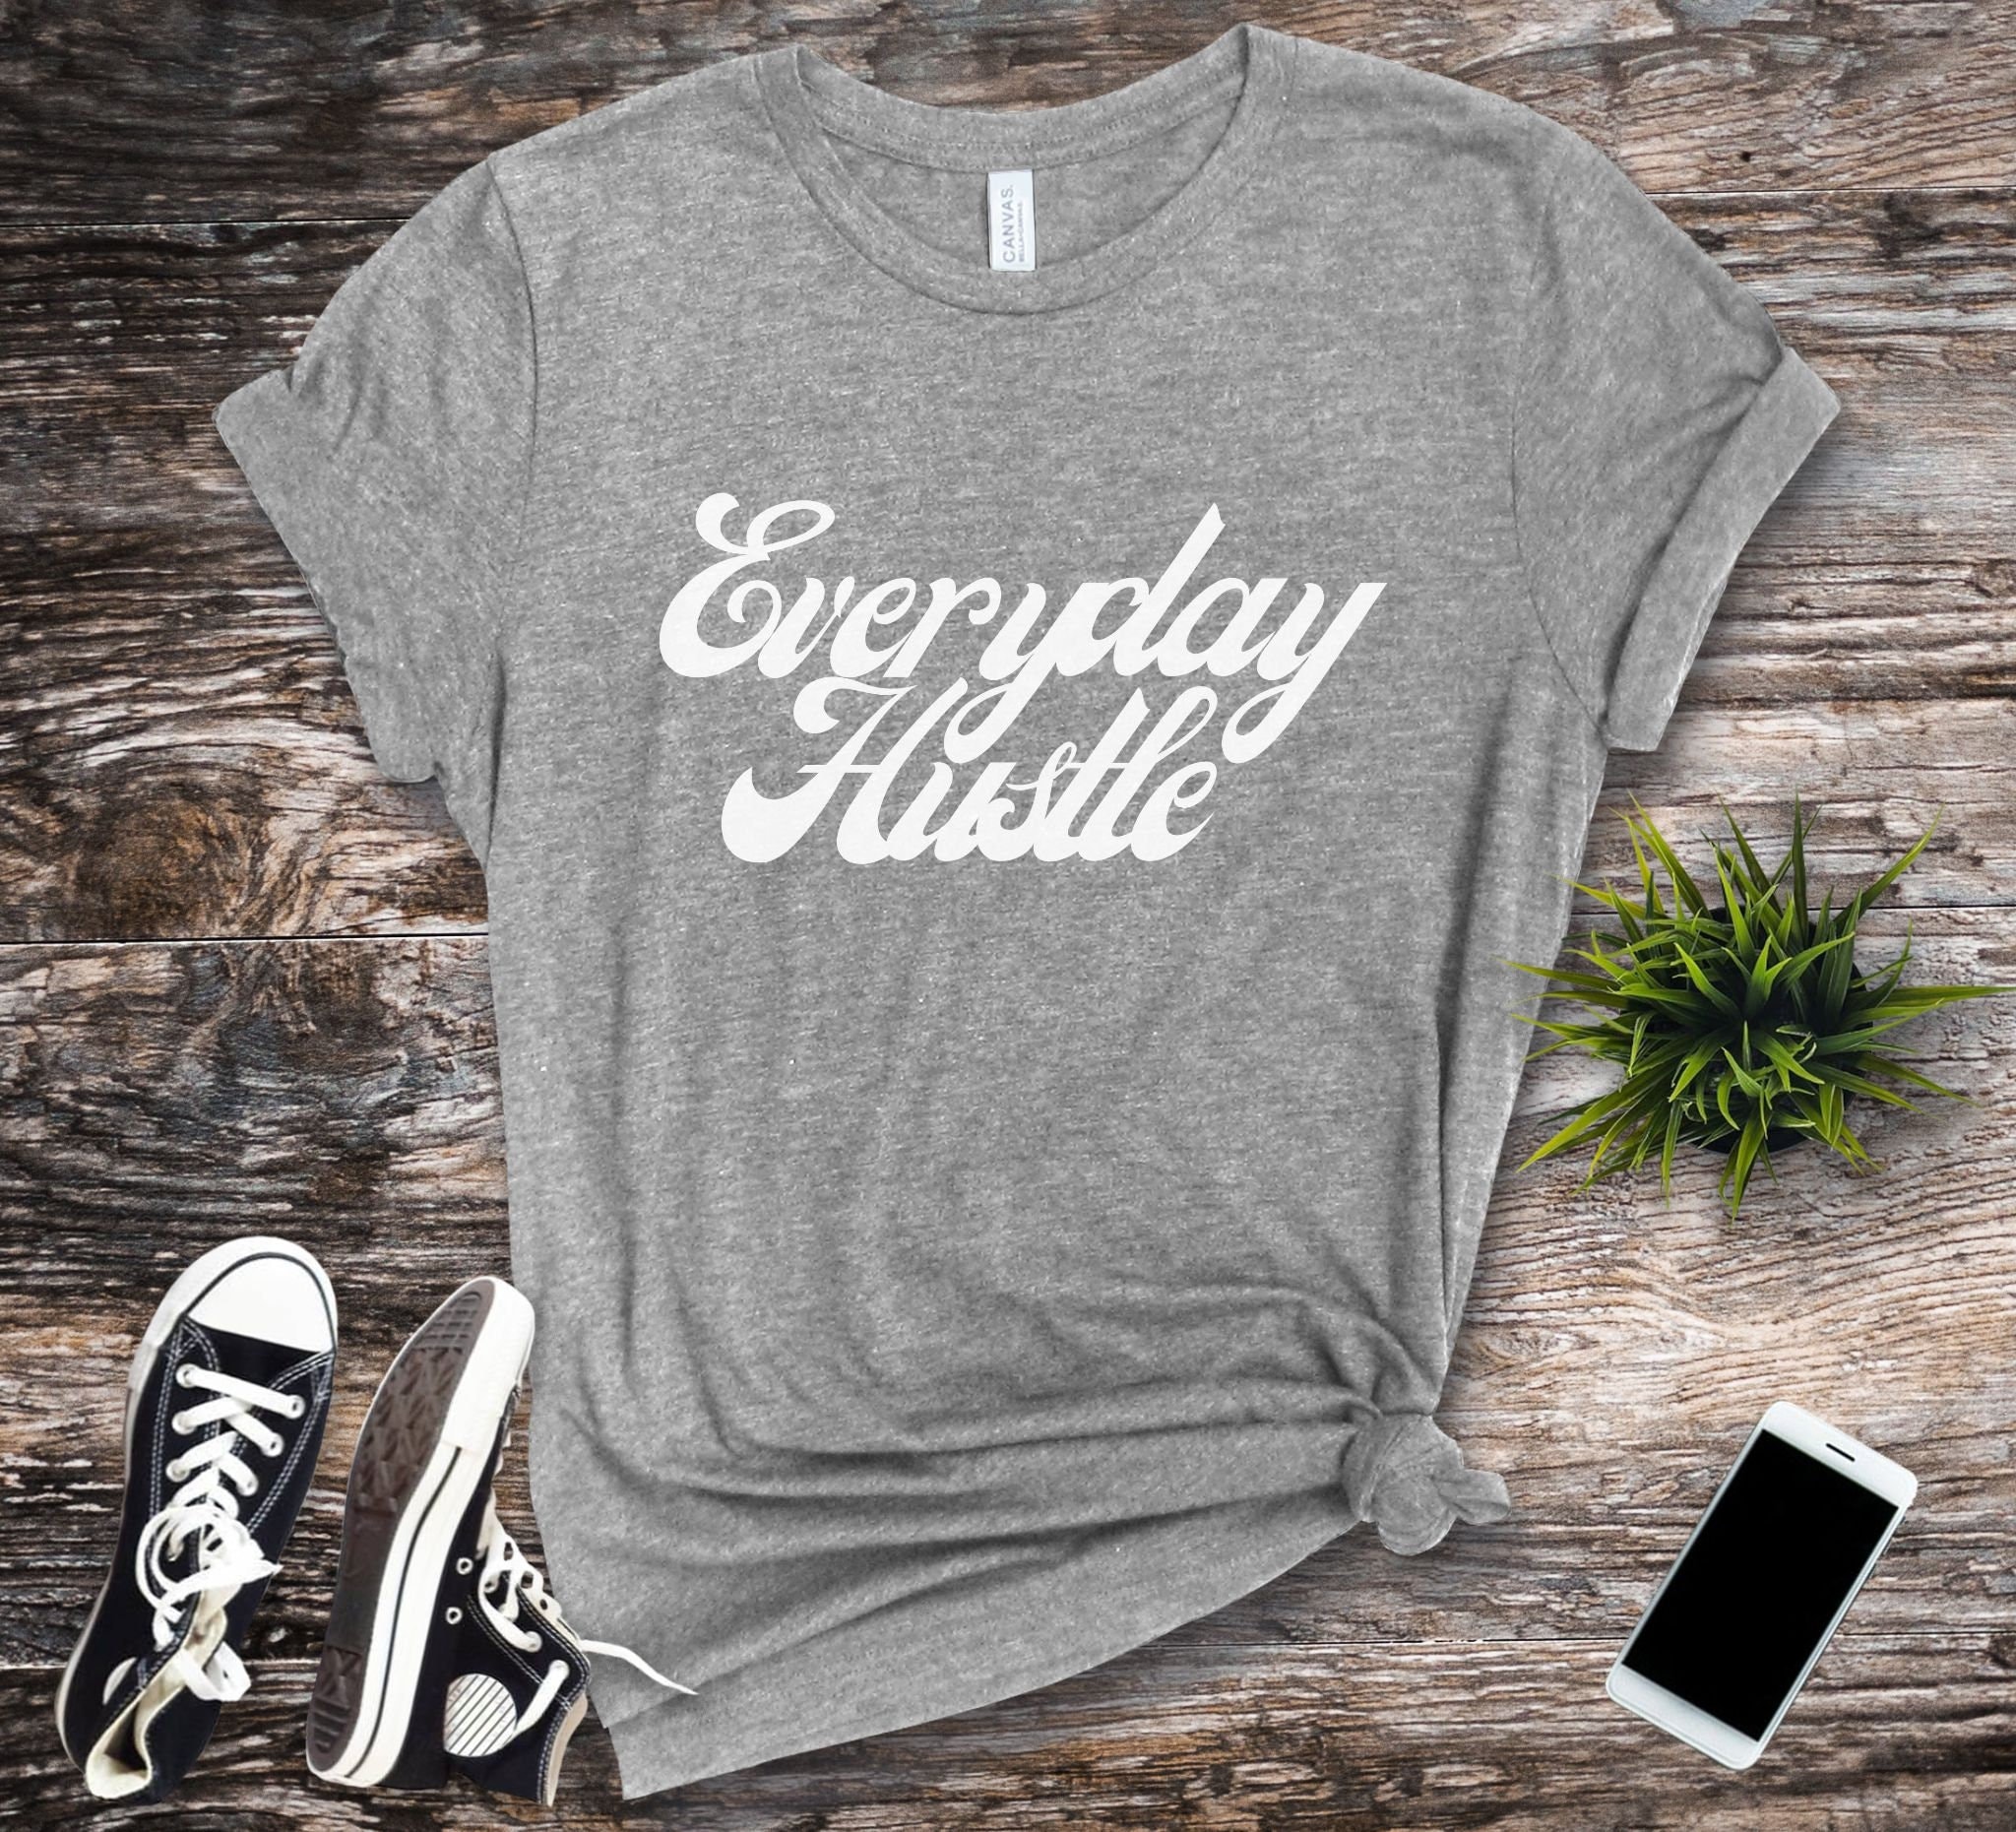 Everyday Hustle Tshirt, Positive Vibes Shirt, Everyday Shirt, Gift for Her,  Gift for Him, Father's Day Gift, Mother's Day Gift 